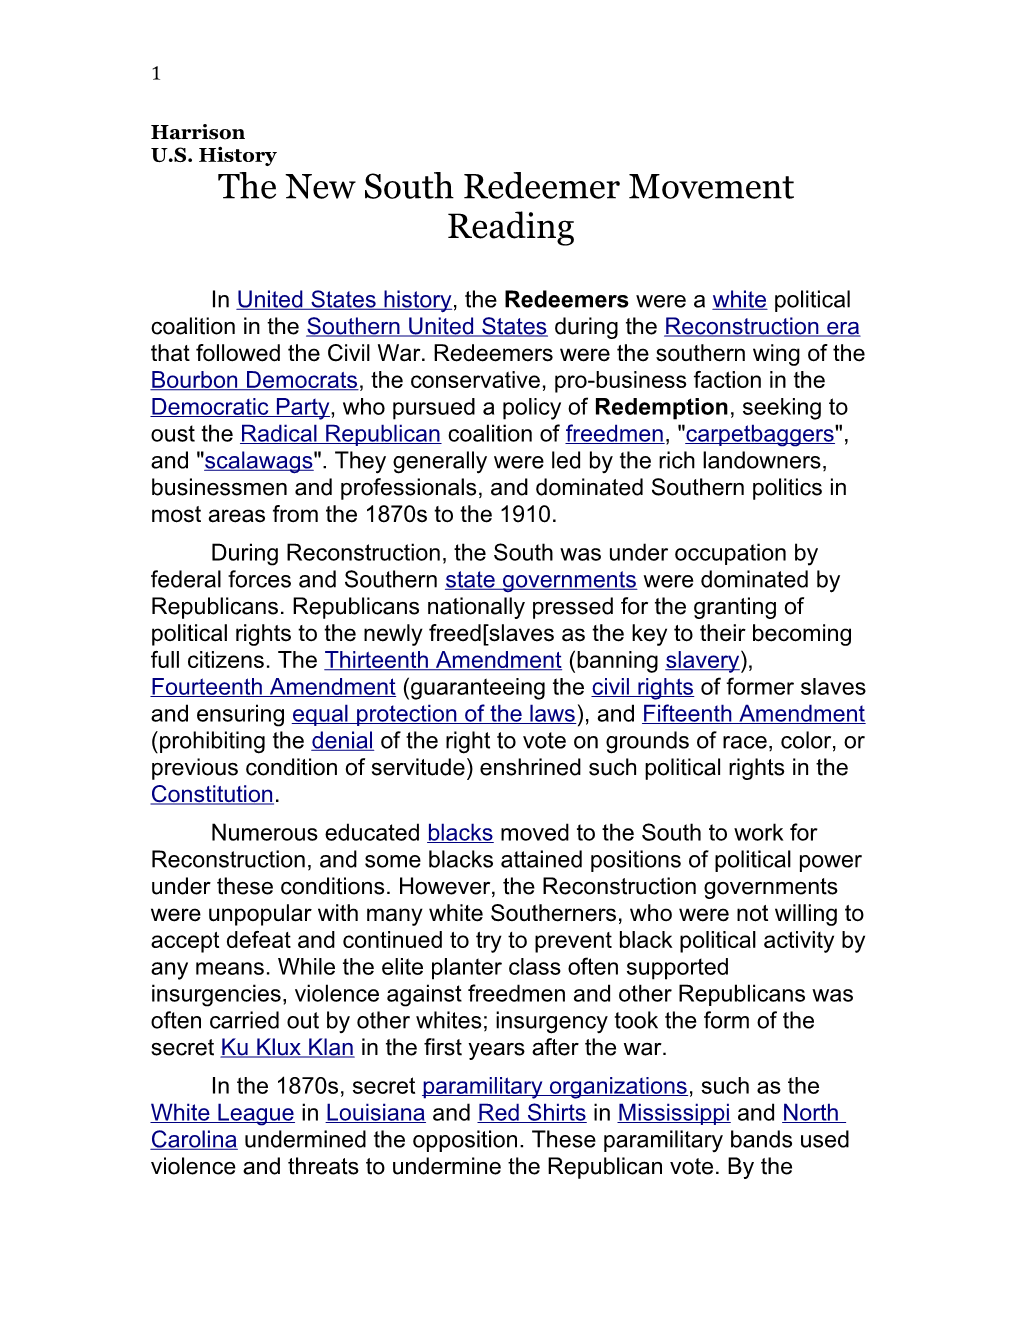 The New South Redeemer Movement